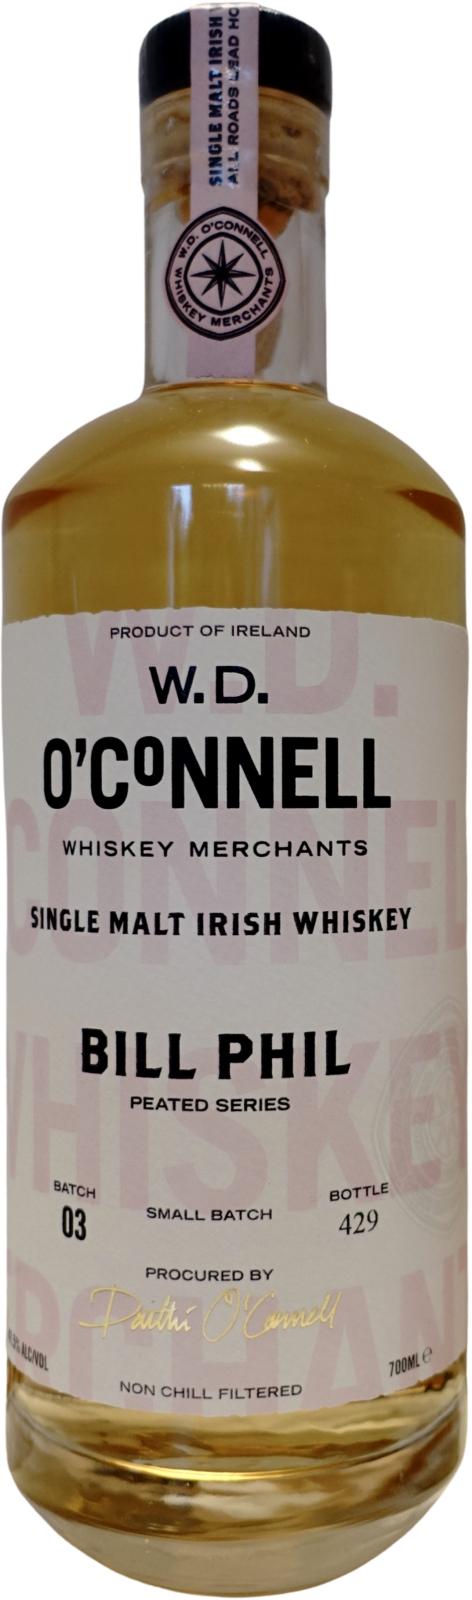 W.D. O'Connell Bill Phil Peated Series WDO